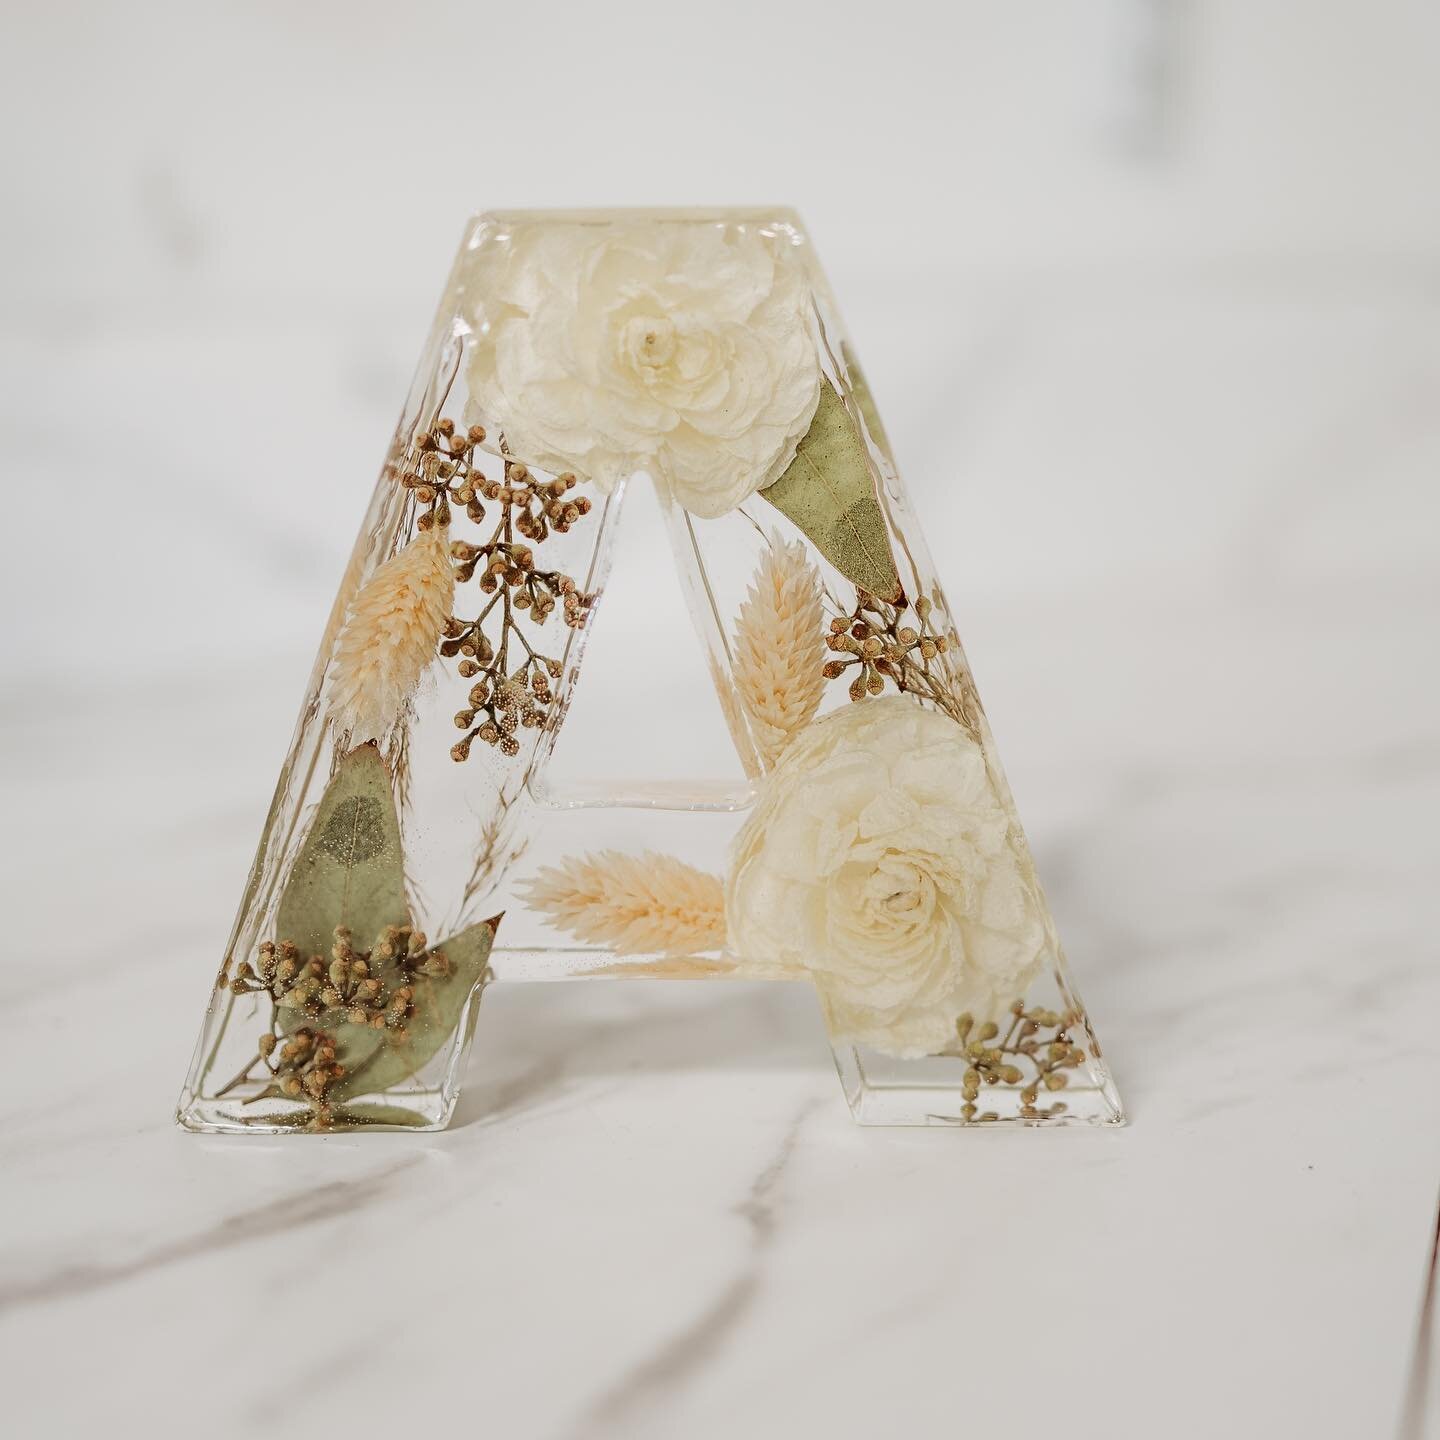 A little boho flair 

Add on any letter(s) of choice to your main design piece. 

Reserve your date with the link in bio 

#resinart #flowersinresin #njflowers #boho #bohodecor #bohodesigns #bohostyle #bohowedding #bohoweddingdecor #weddingflower